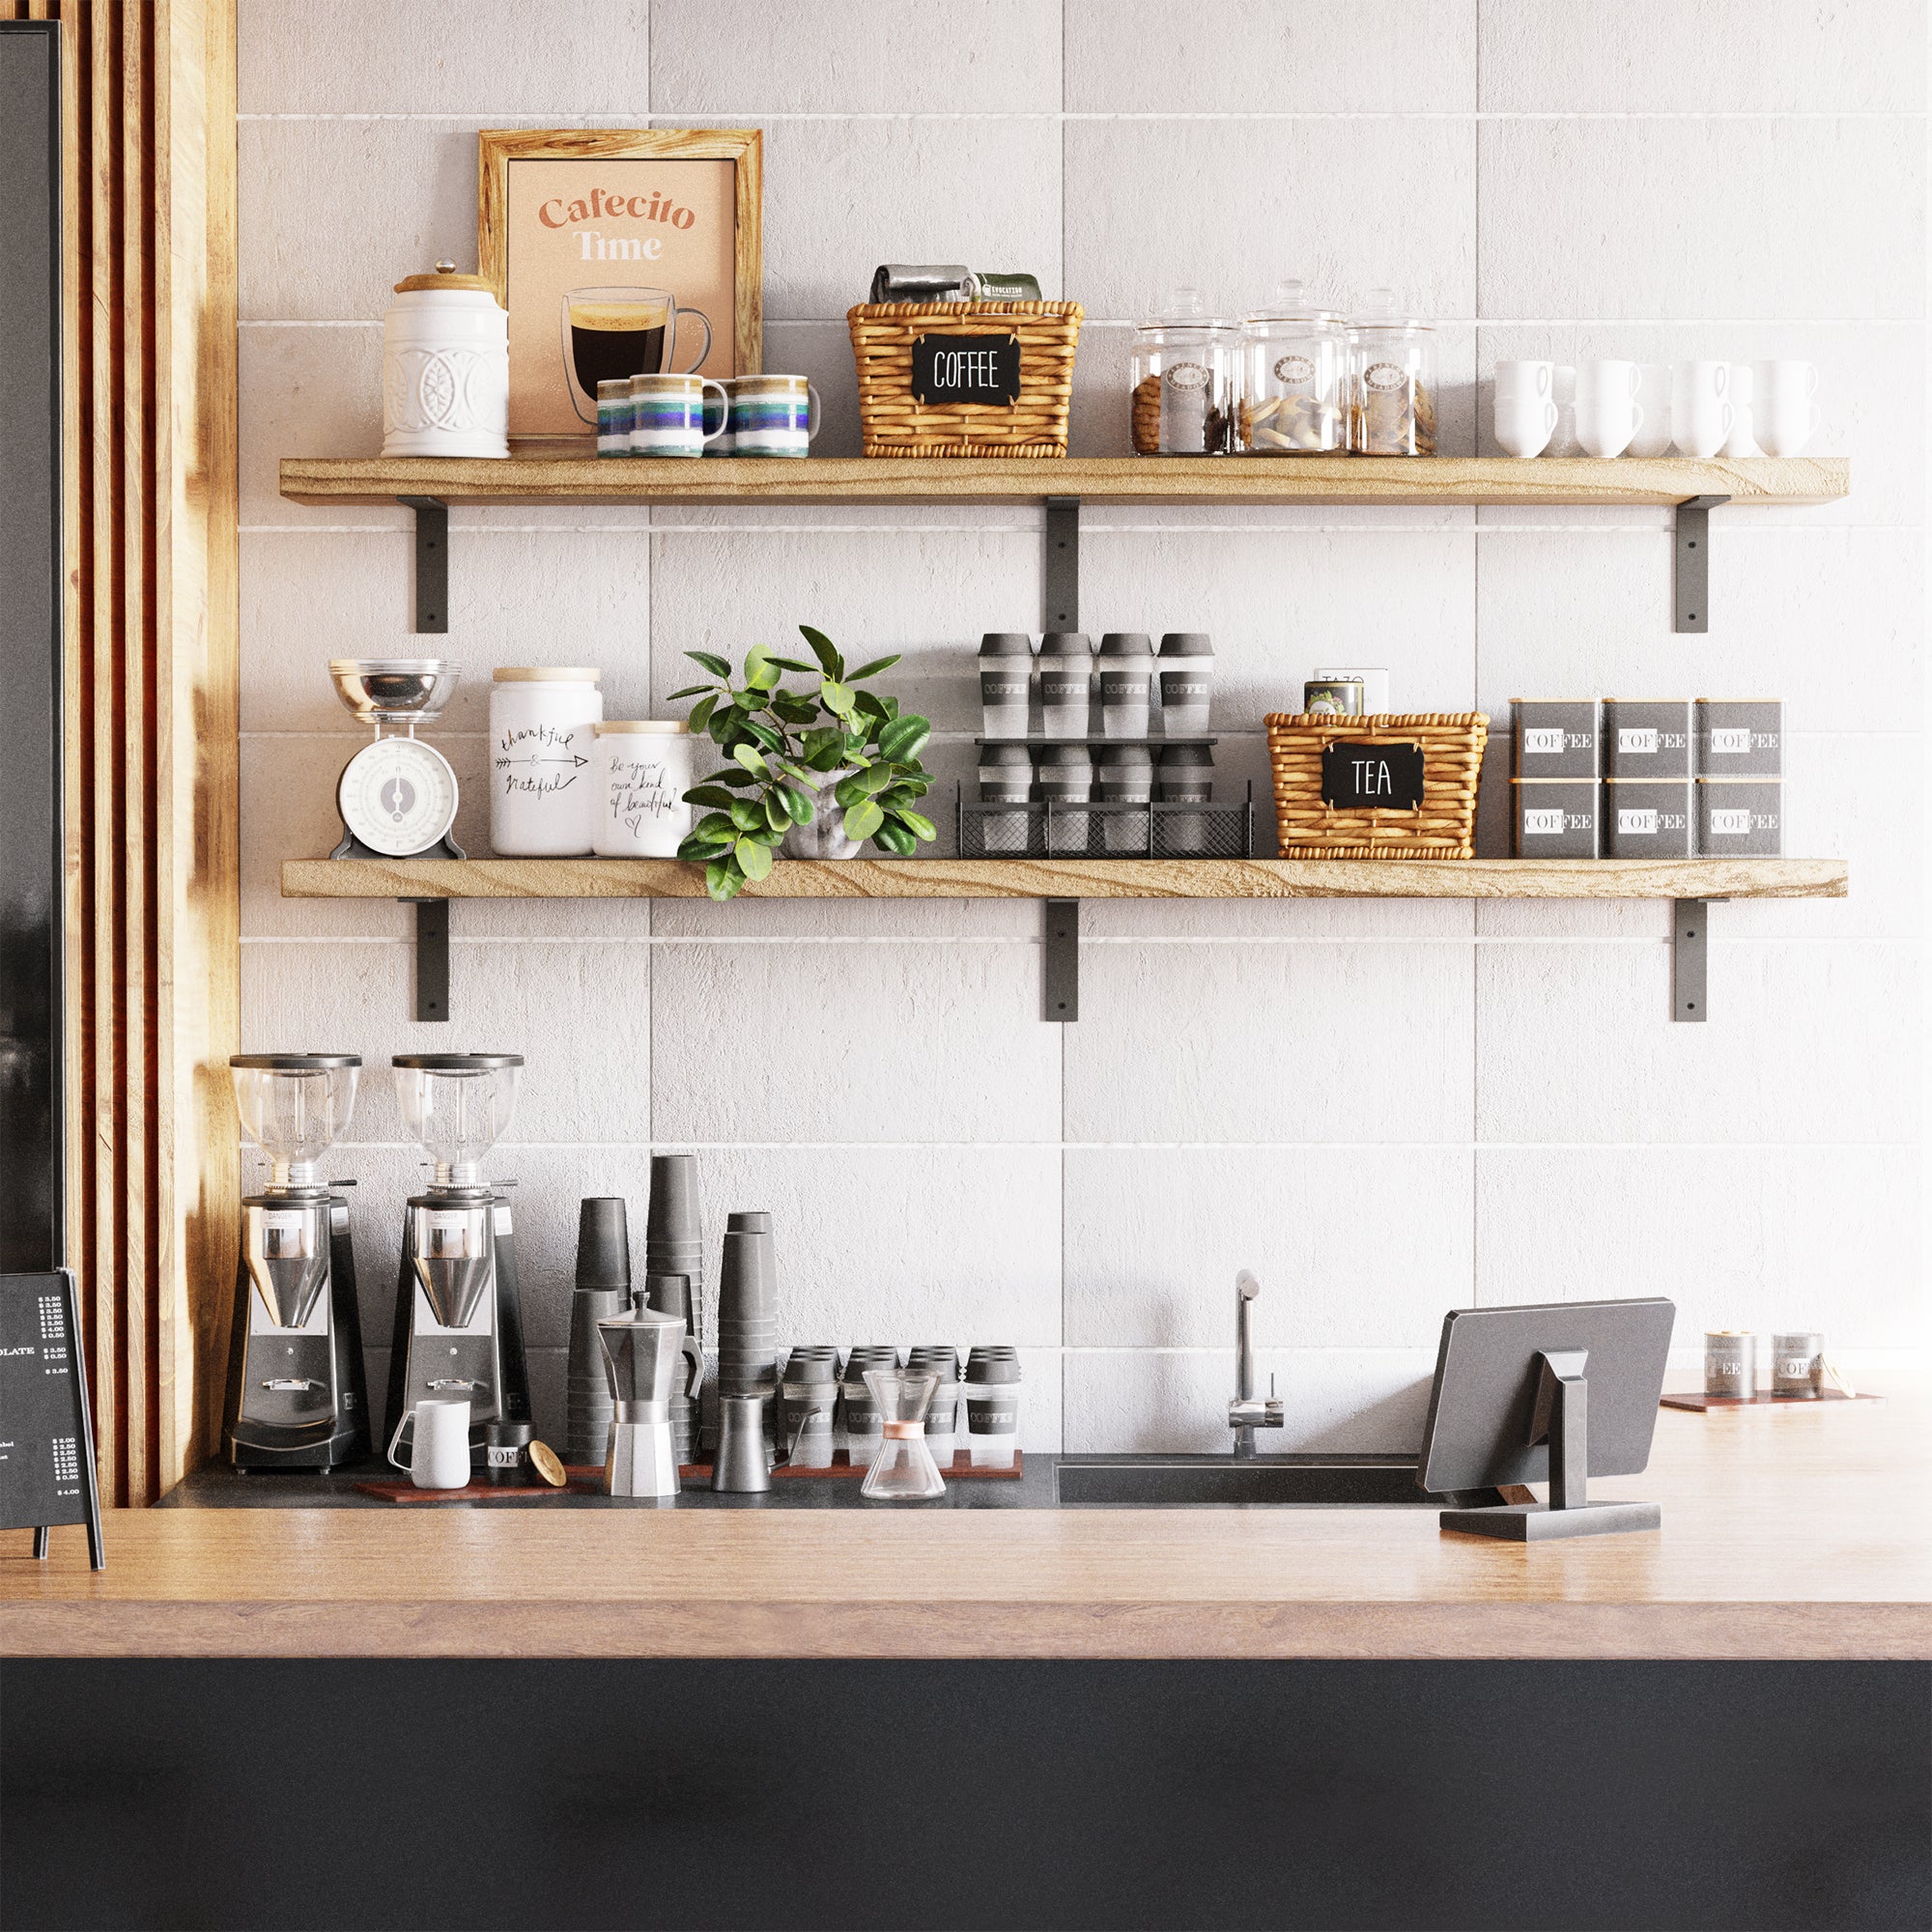 A shelf arrangement with storage shelves heavy duty burnt color ideal for coffee lovers, featuring coffee grinders, cups, and related accessories.